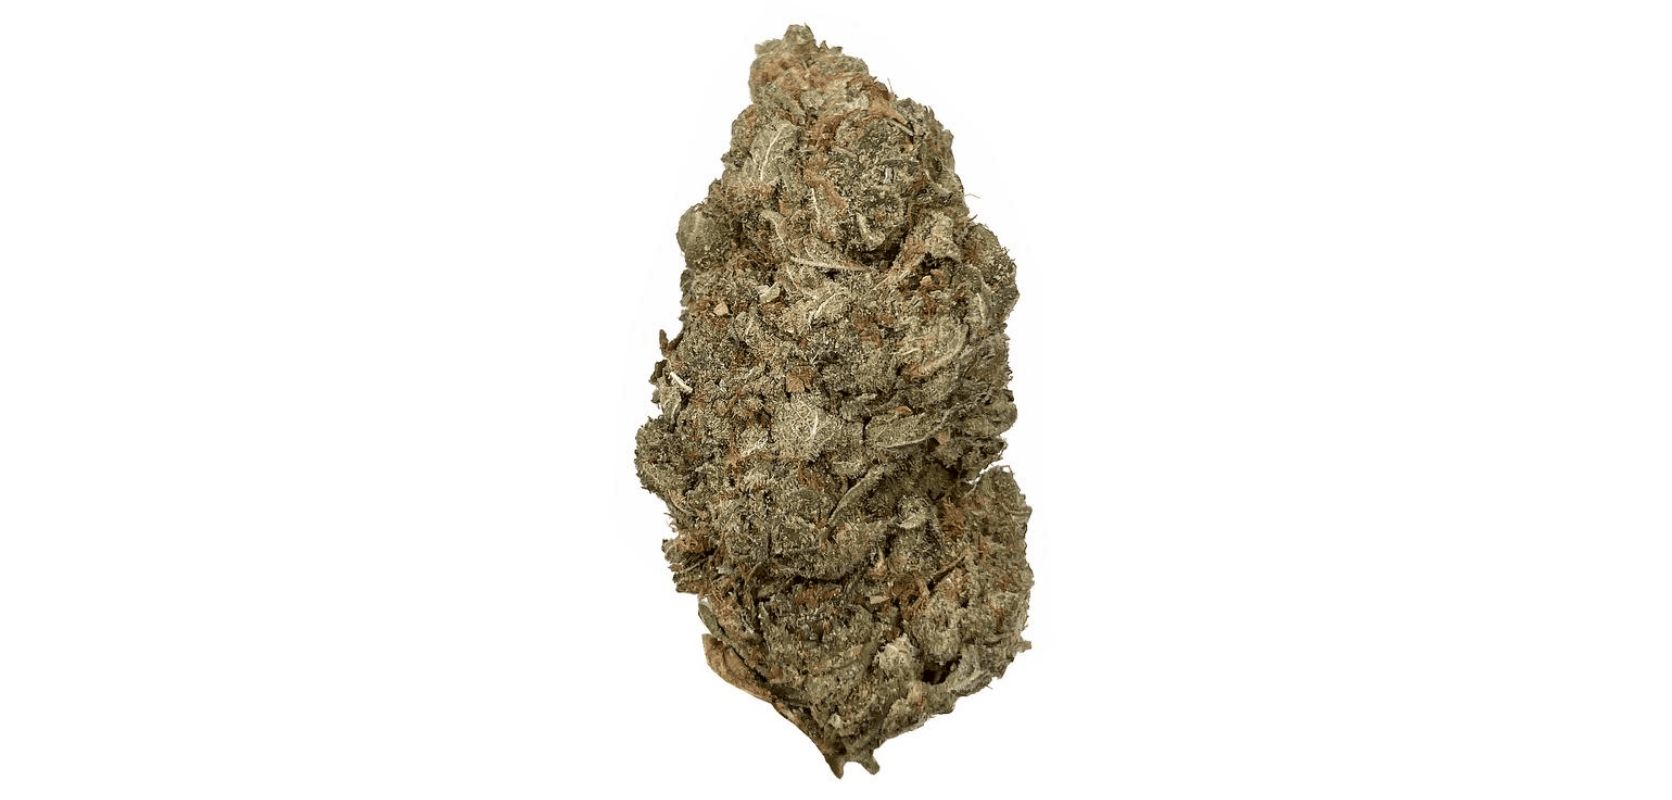 High-quality buds such as the Ice Cream Cake strain boast vibrant colours, dense trichome coverage, and a robust structure, indicating healthy growth. 